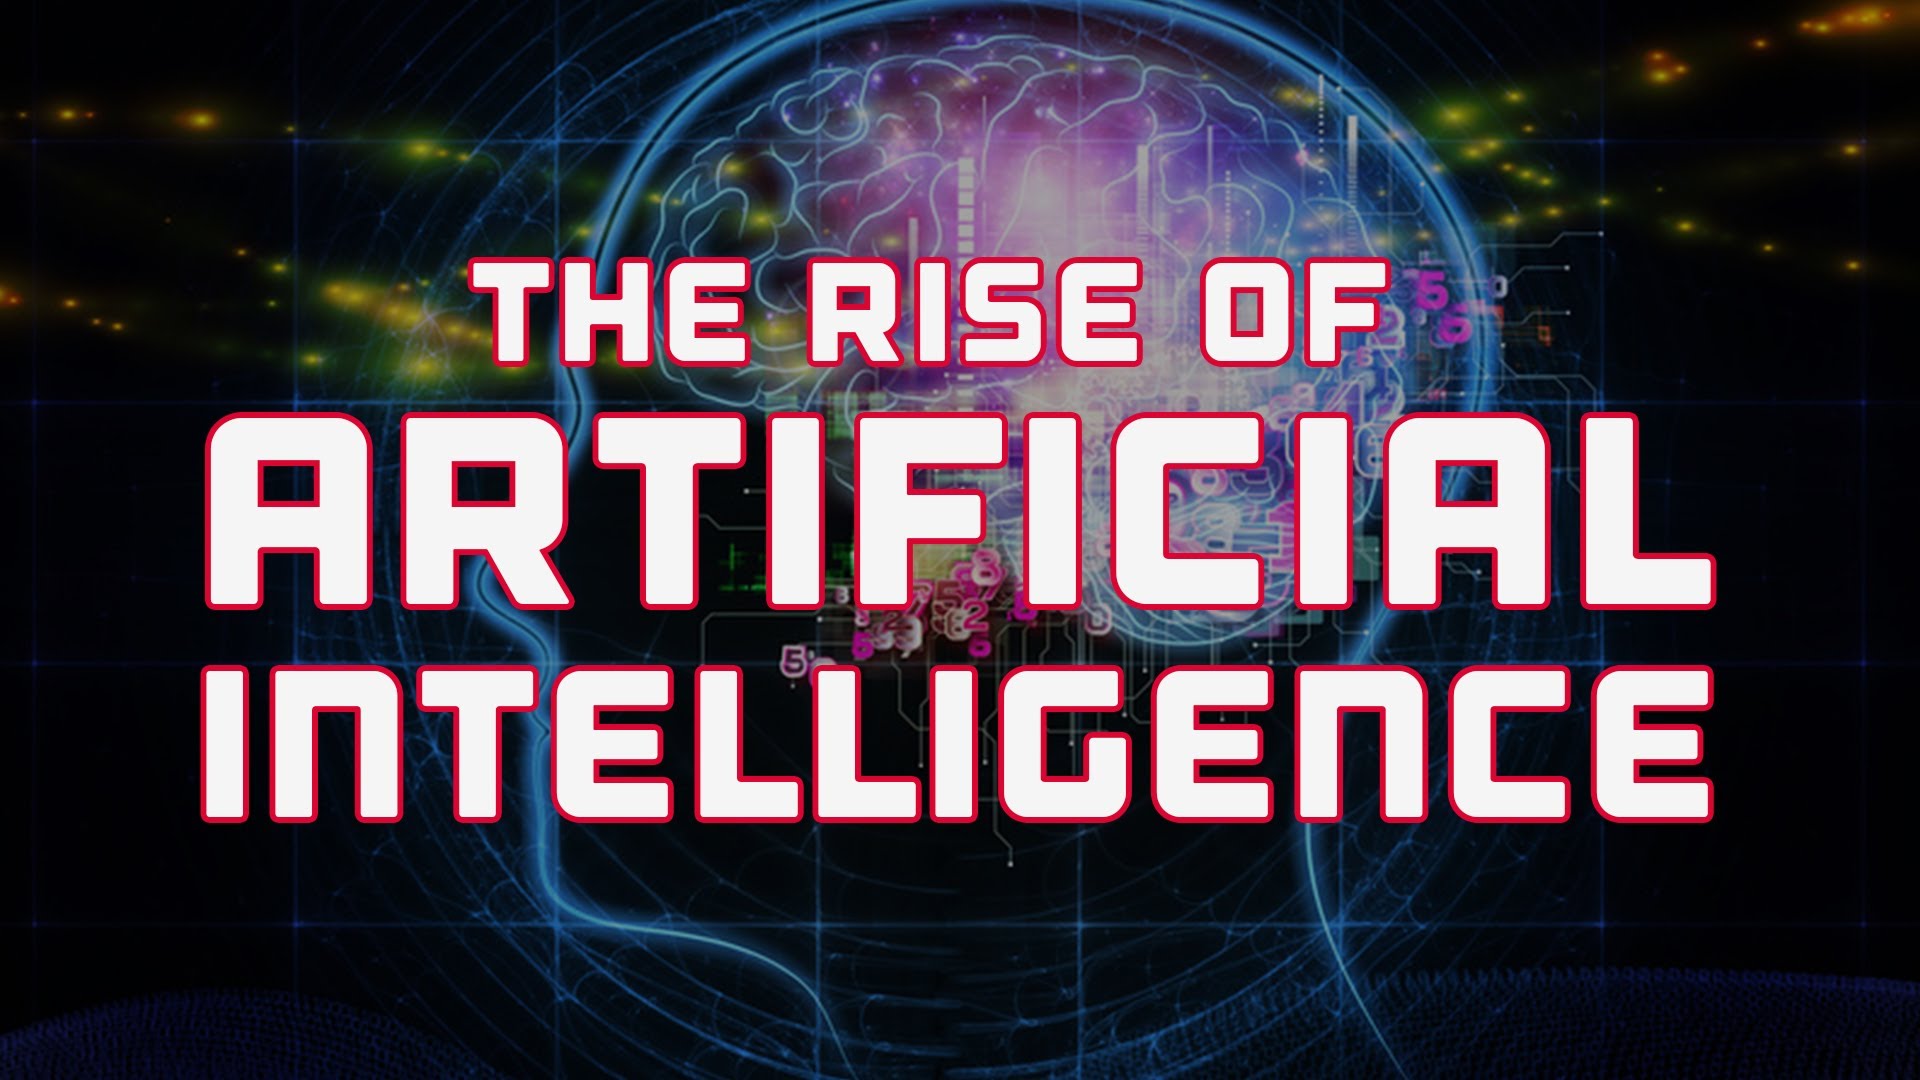 The Rise of Artificial Intelligence | Off Book | PBS Digital Studios